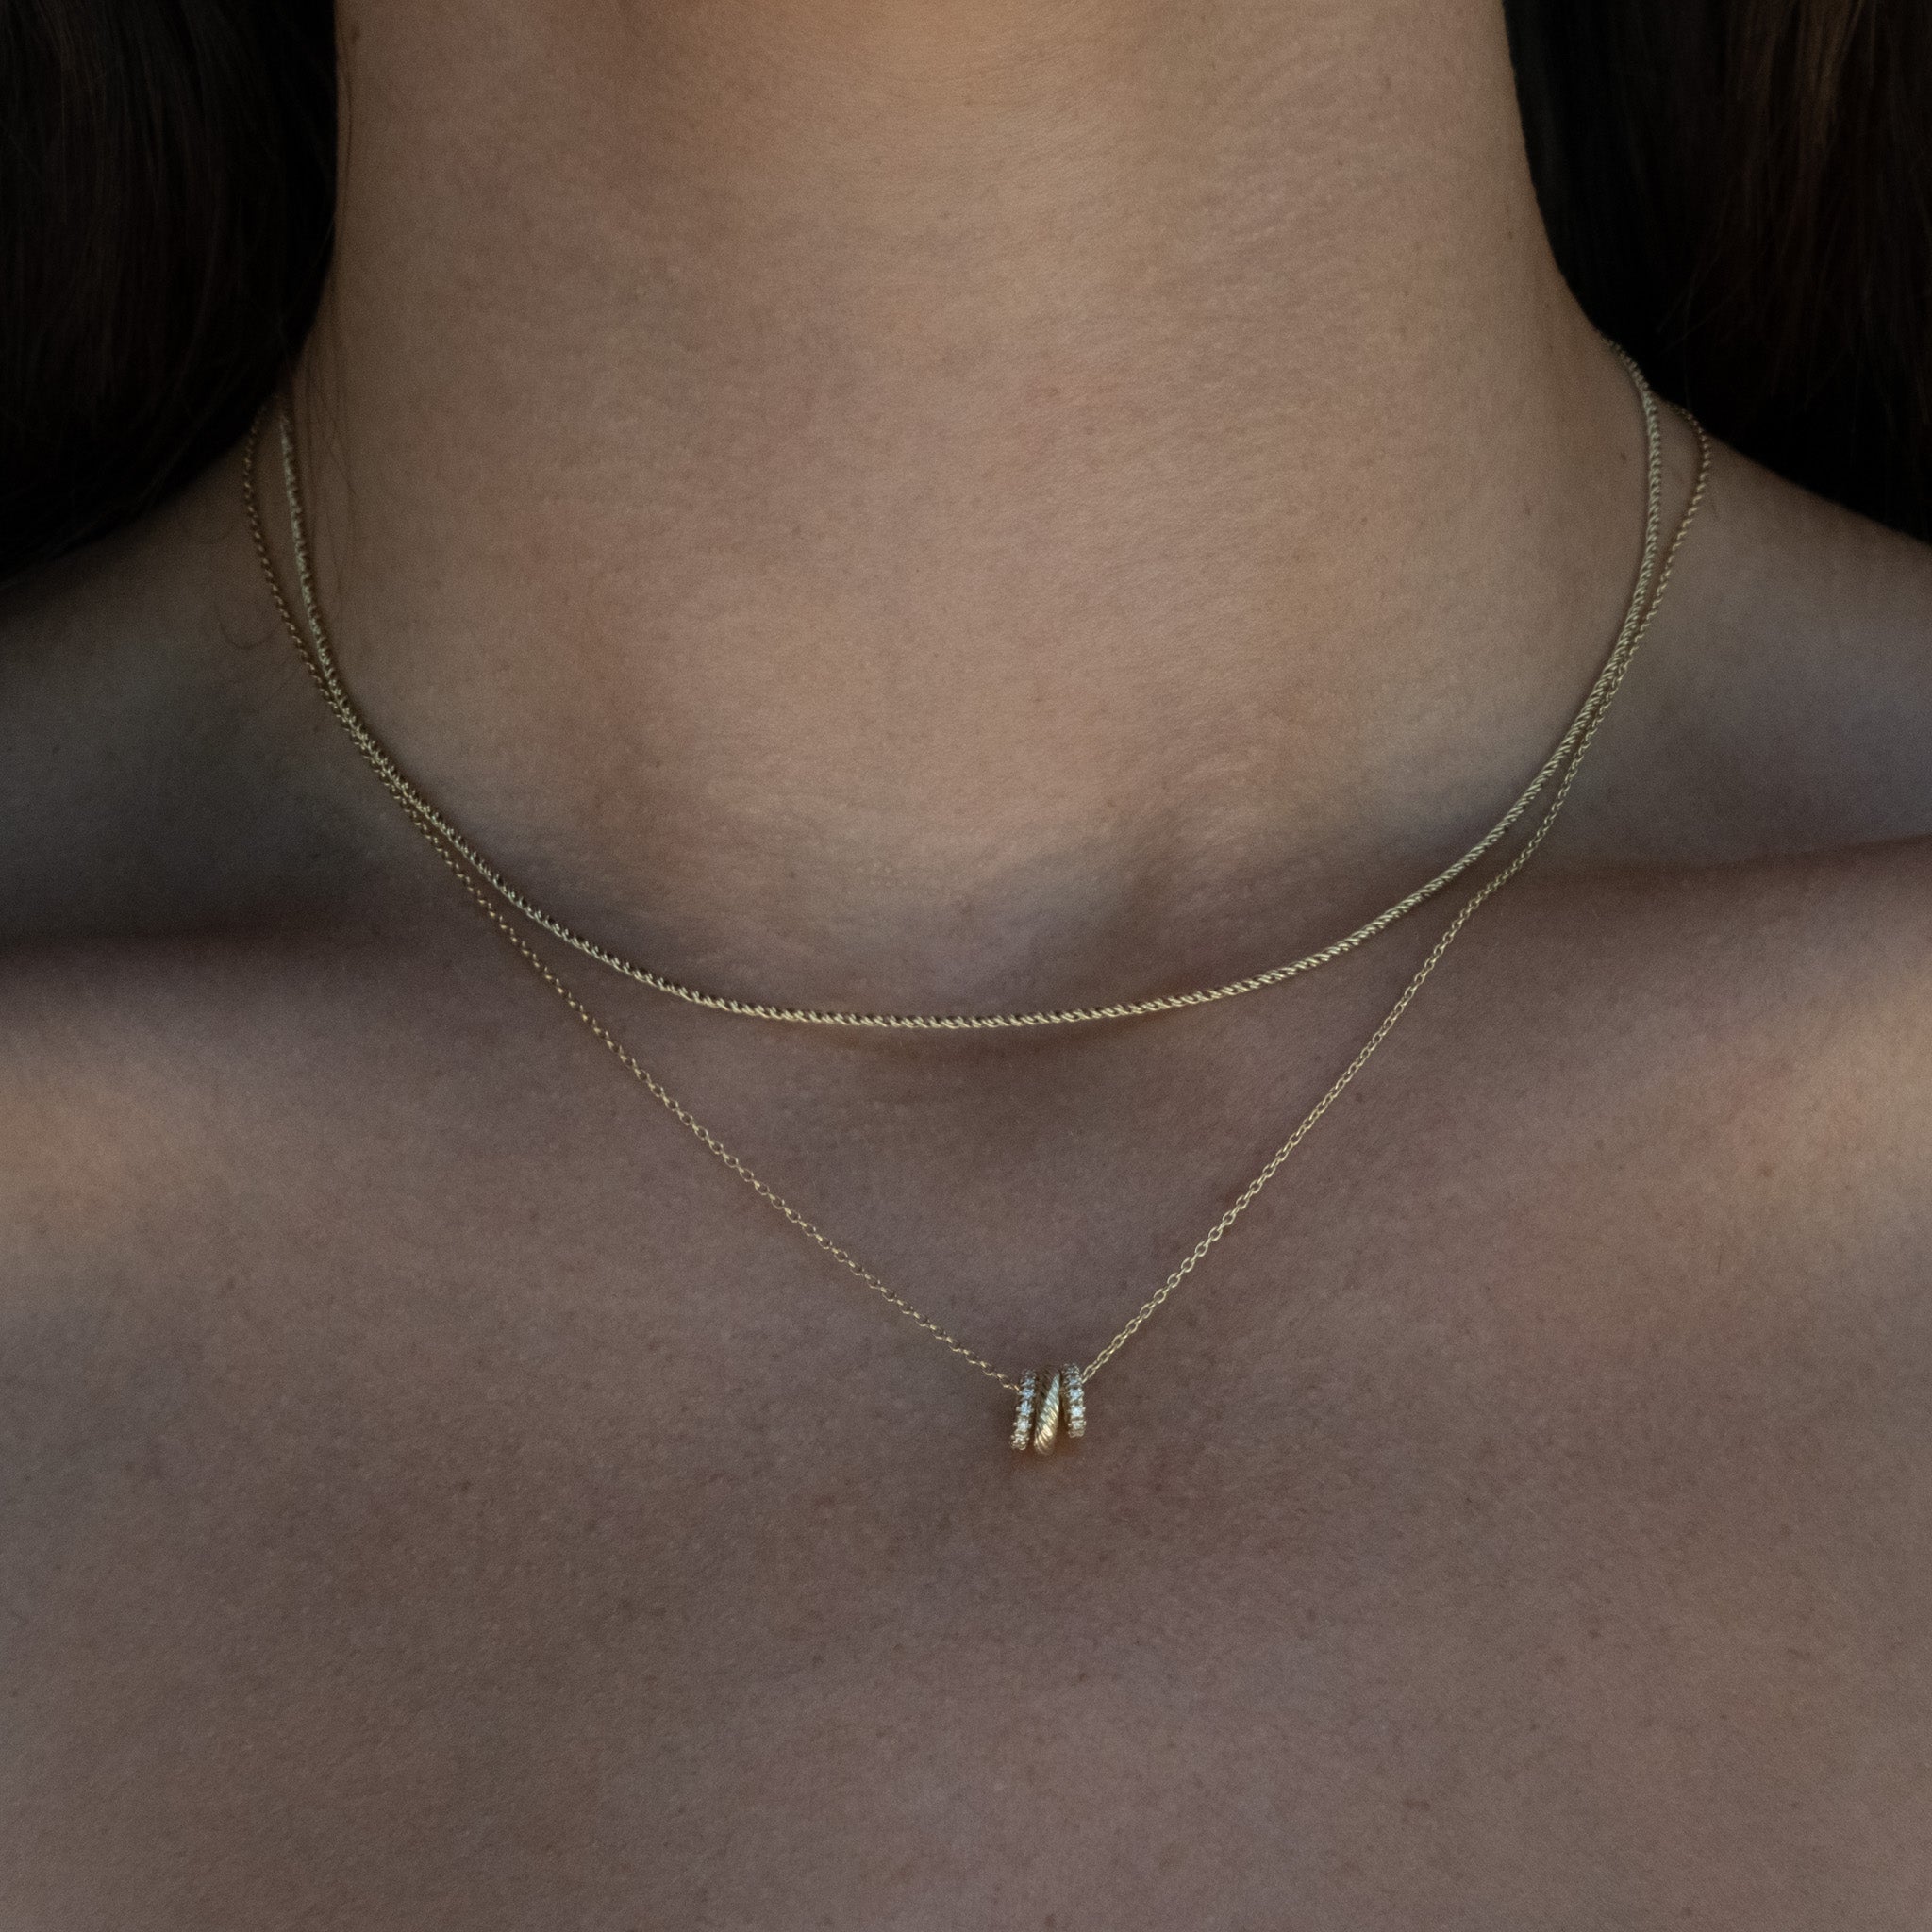 A close up of a woman's chest wearing an Aiden Jae Banyan Rope Chain Necklace.